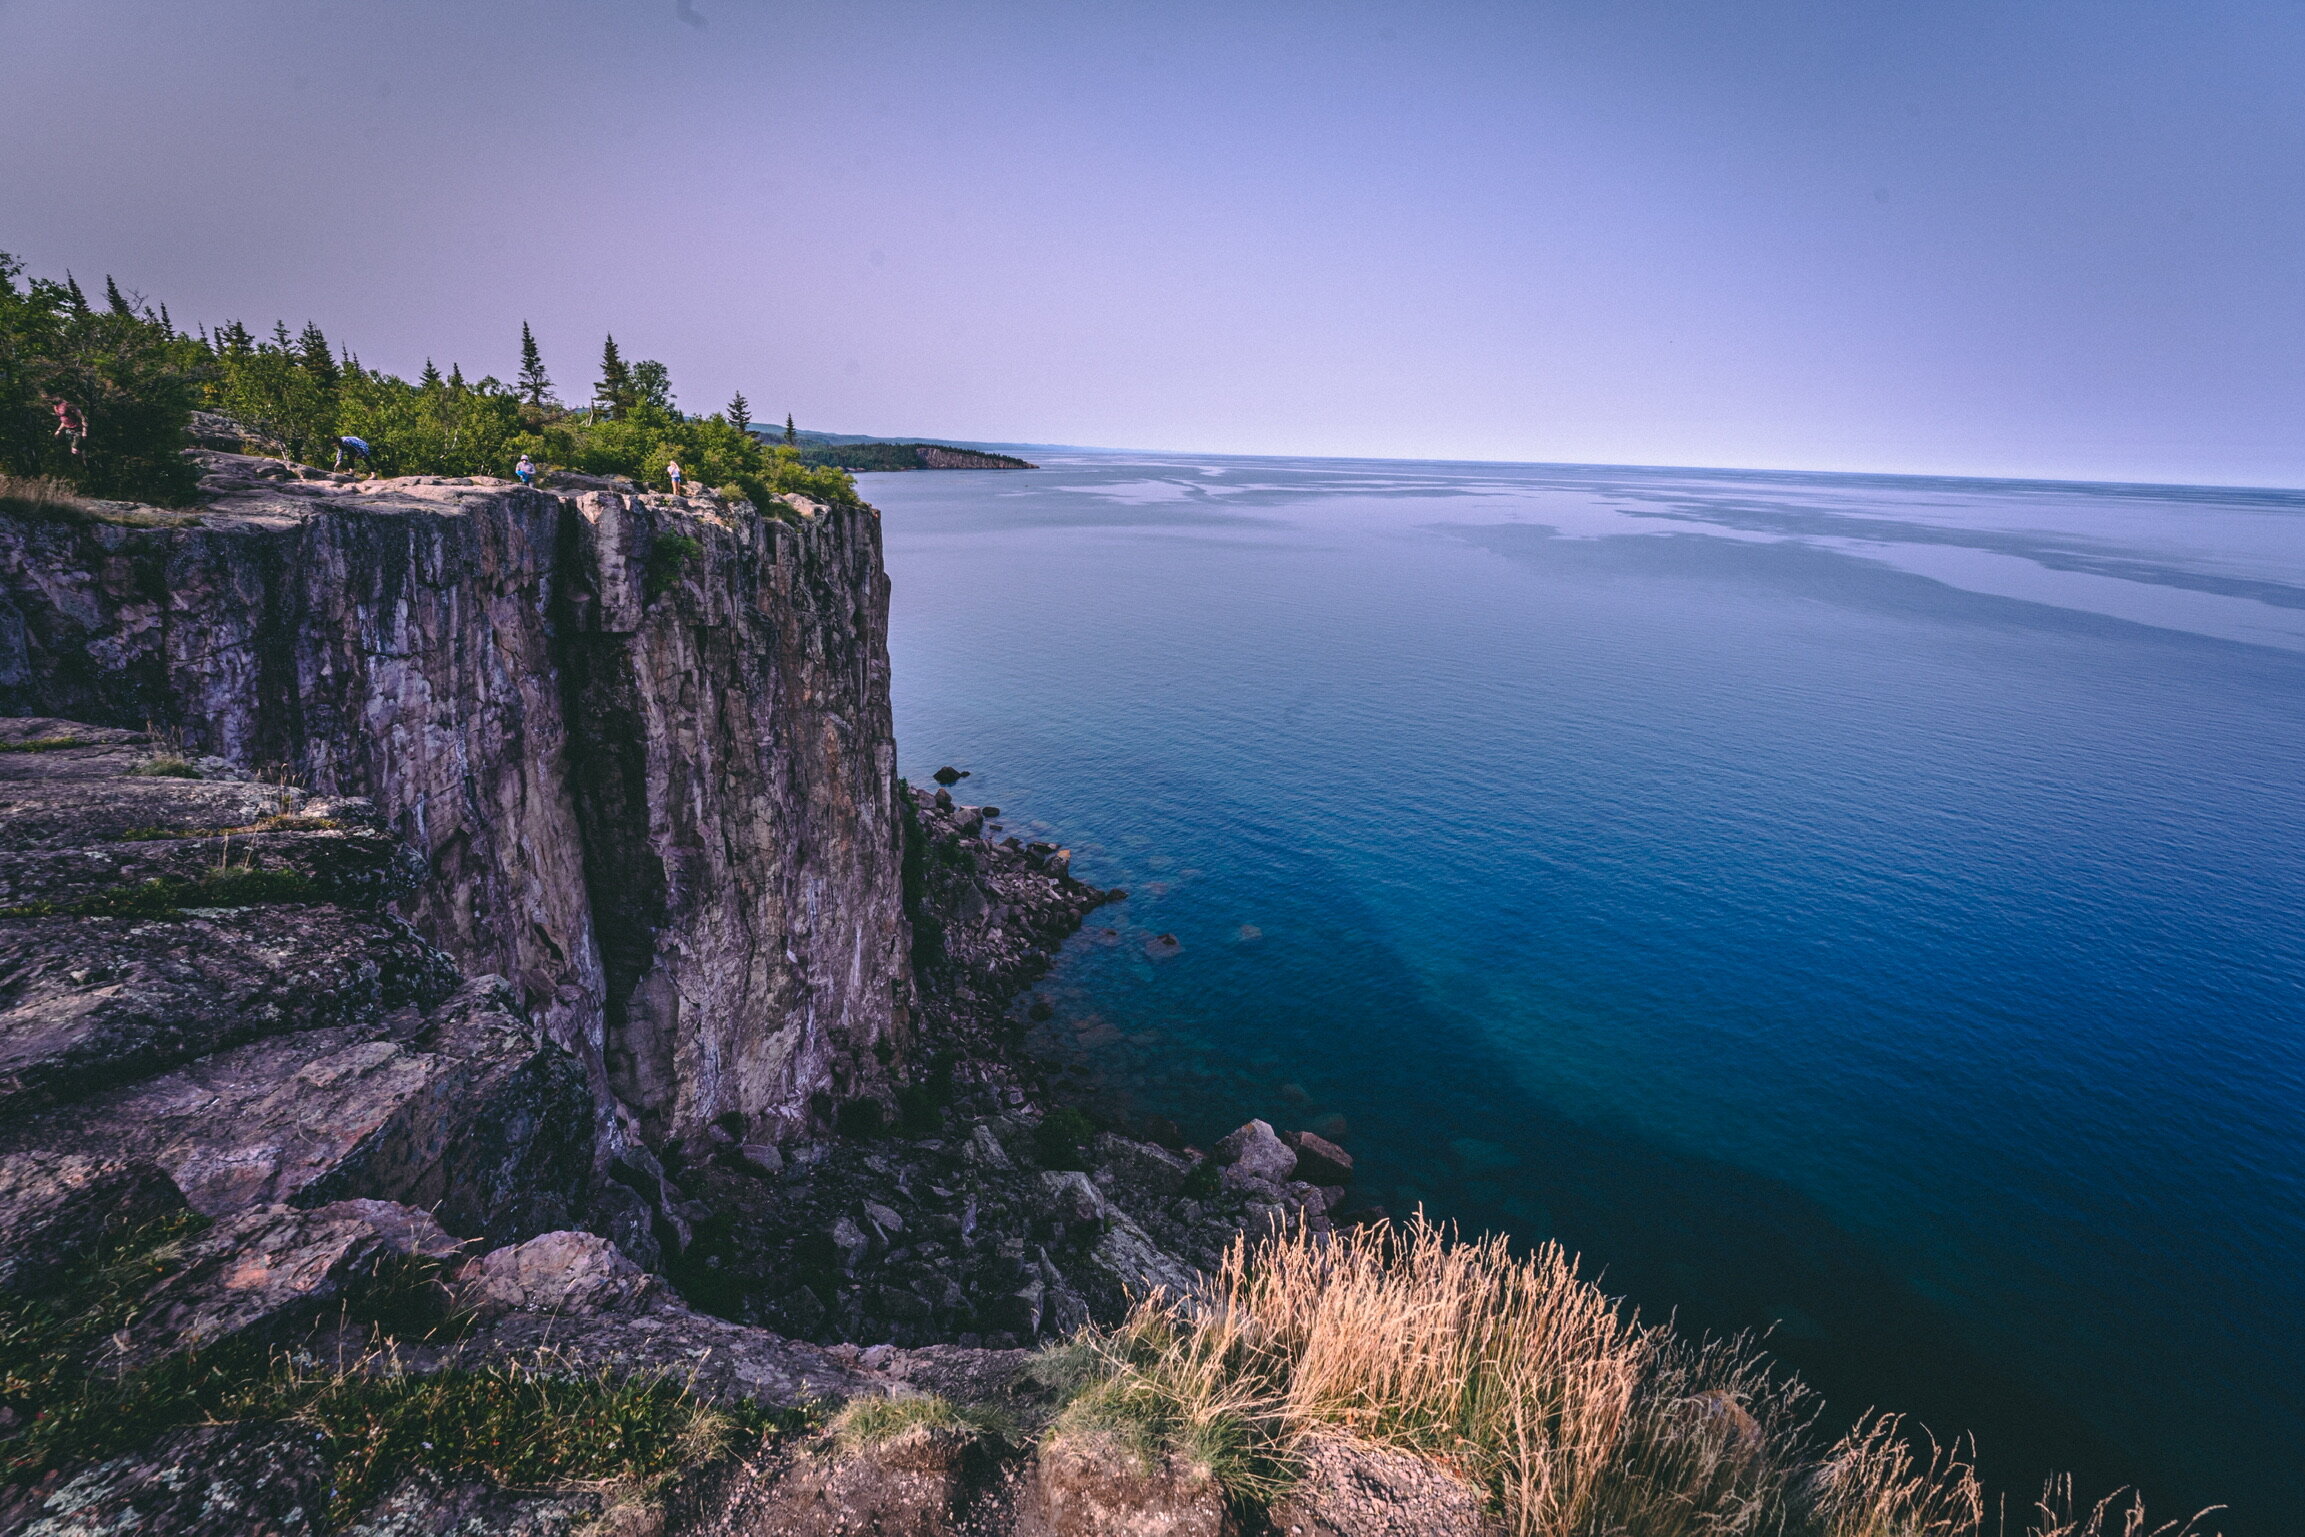  The  North Shore of Lake Superior  is a scenic state highway that runs from Duluth, Minnesota to Canada. Lake Superior is the largest of the Great Lakes—by a lot. With a surface area of nearly 32,000 miles and areas as deep as 1,332 feet, Lake Super